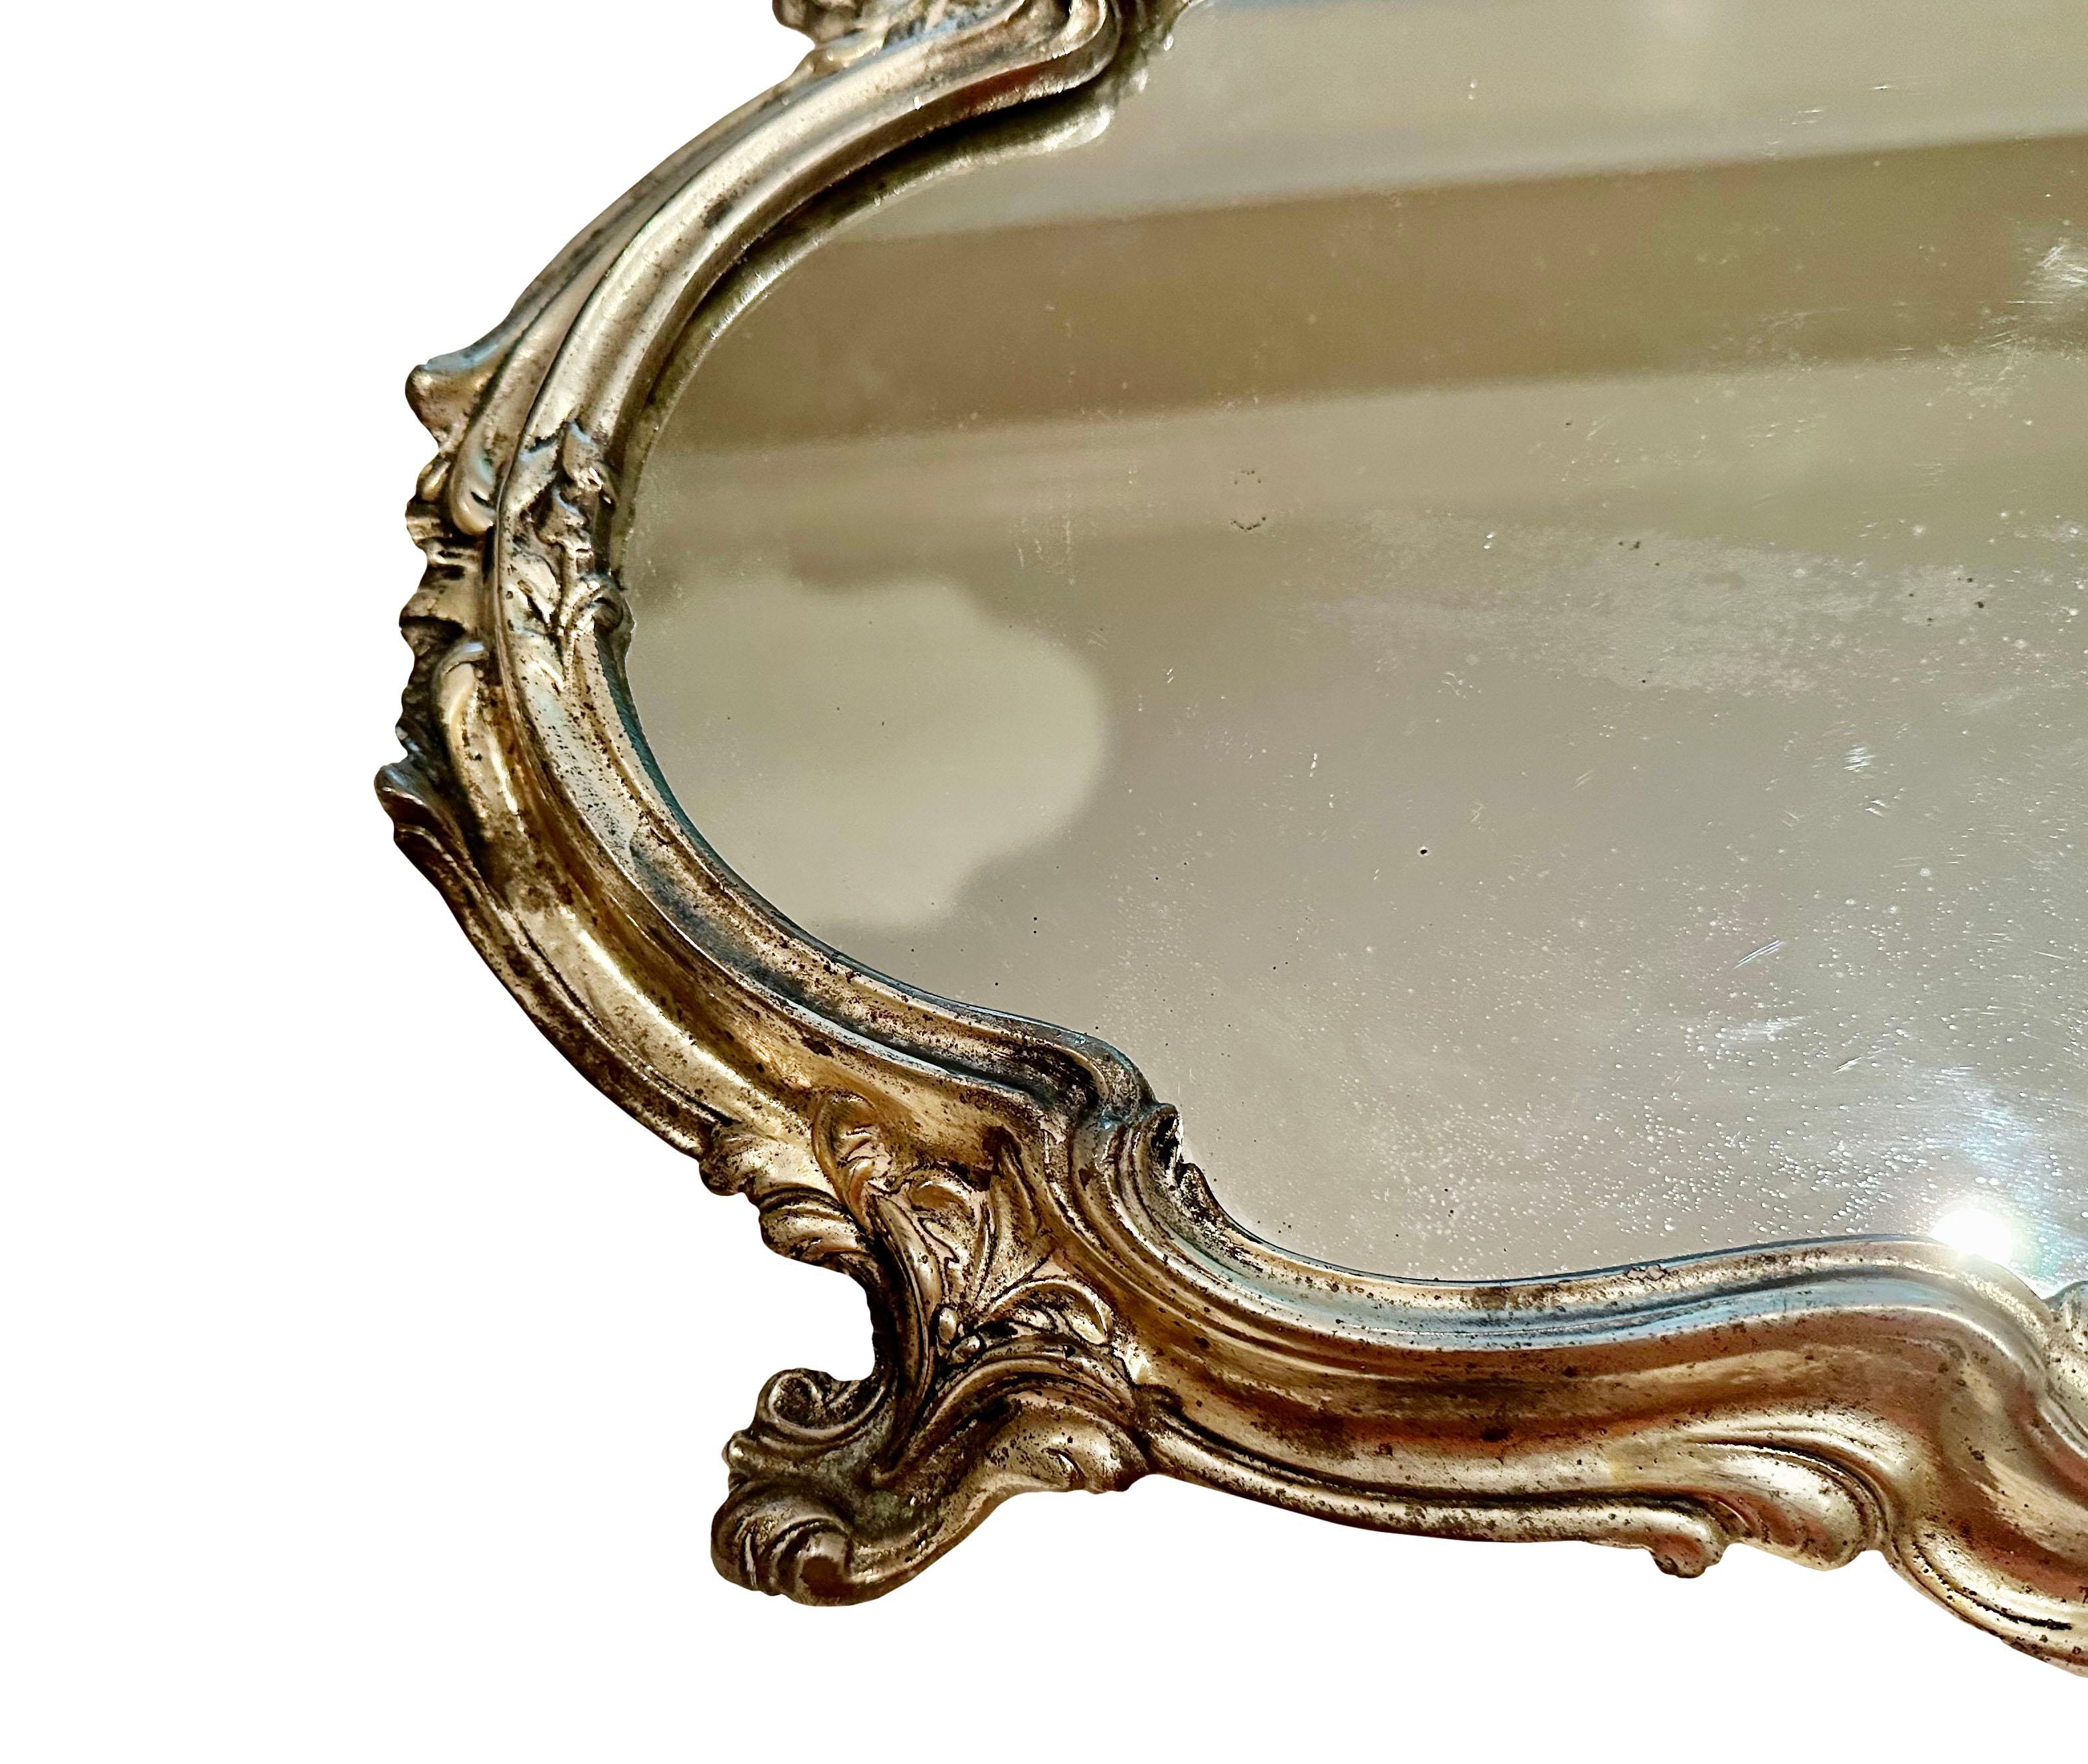 A beautiful French Rococo style silver plate plateau. Footed with a mirrored top. circa 1920s, France.